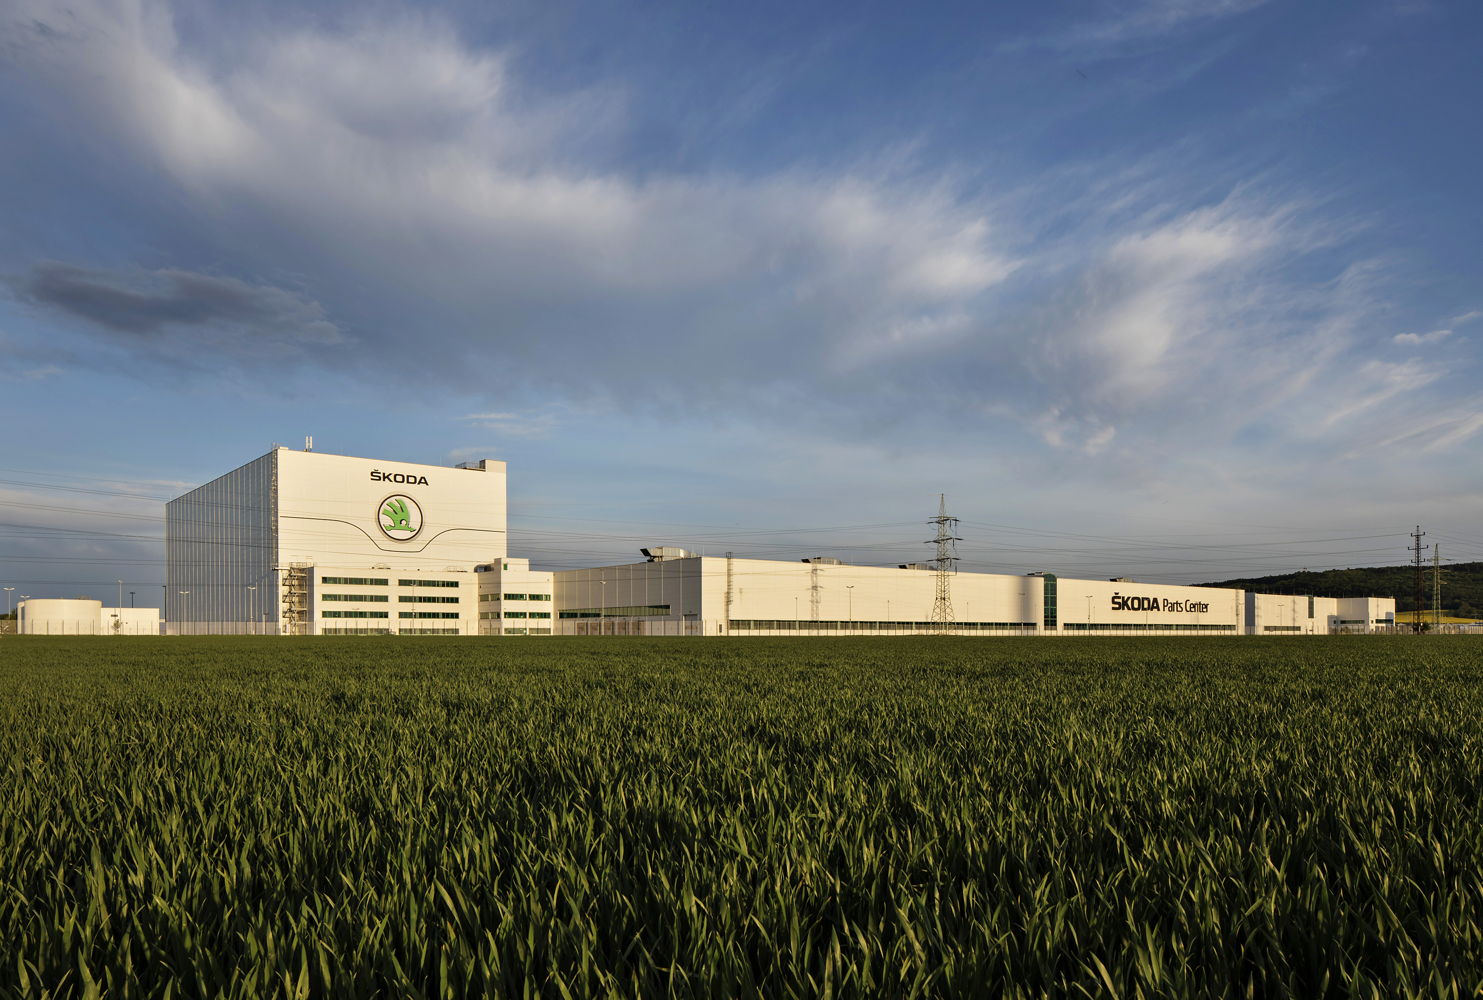 The total area of the ŠKODA Parts Centre is 180,000 square metres – 105,000 square metres of which is storage space. As one of the Volkswagen Group’s three European parts centres, it is the largest genuine parts warehouse in the Czech Republic. 